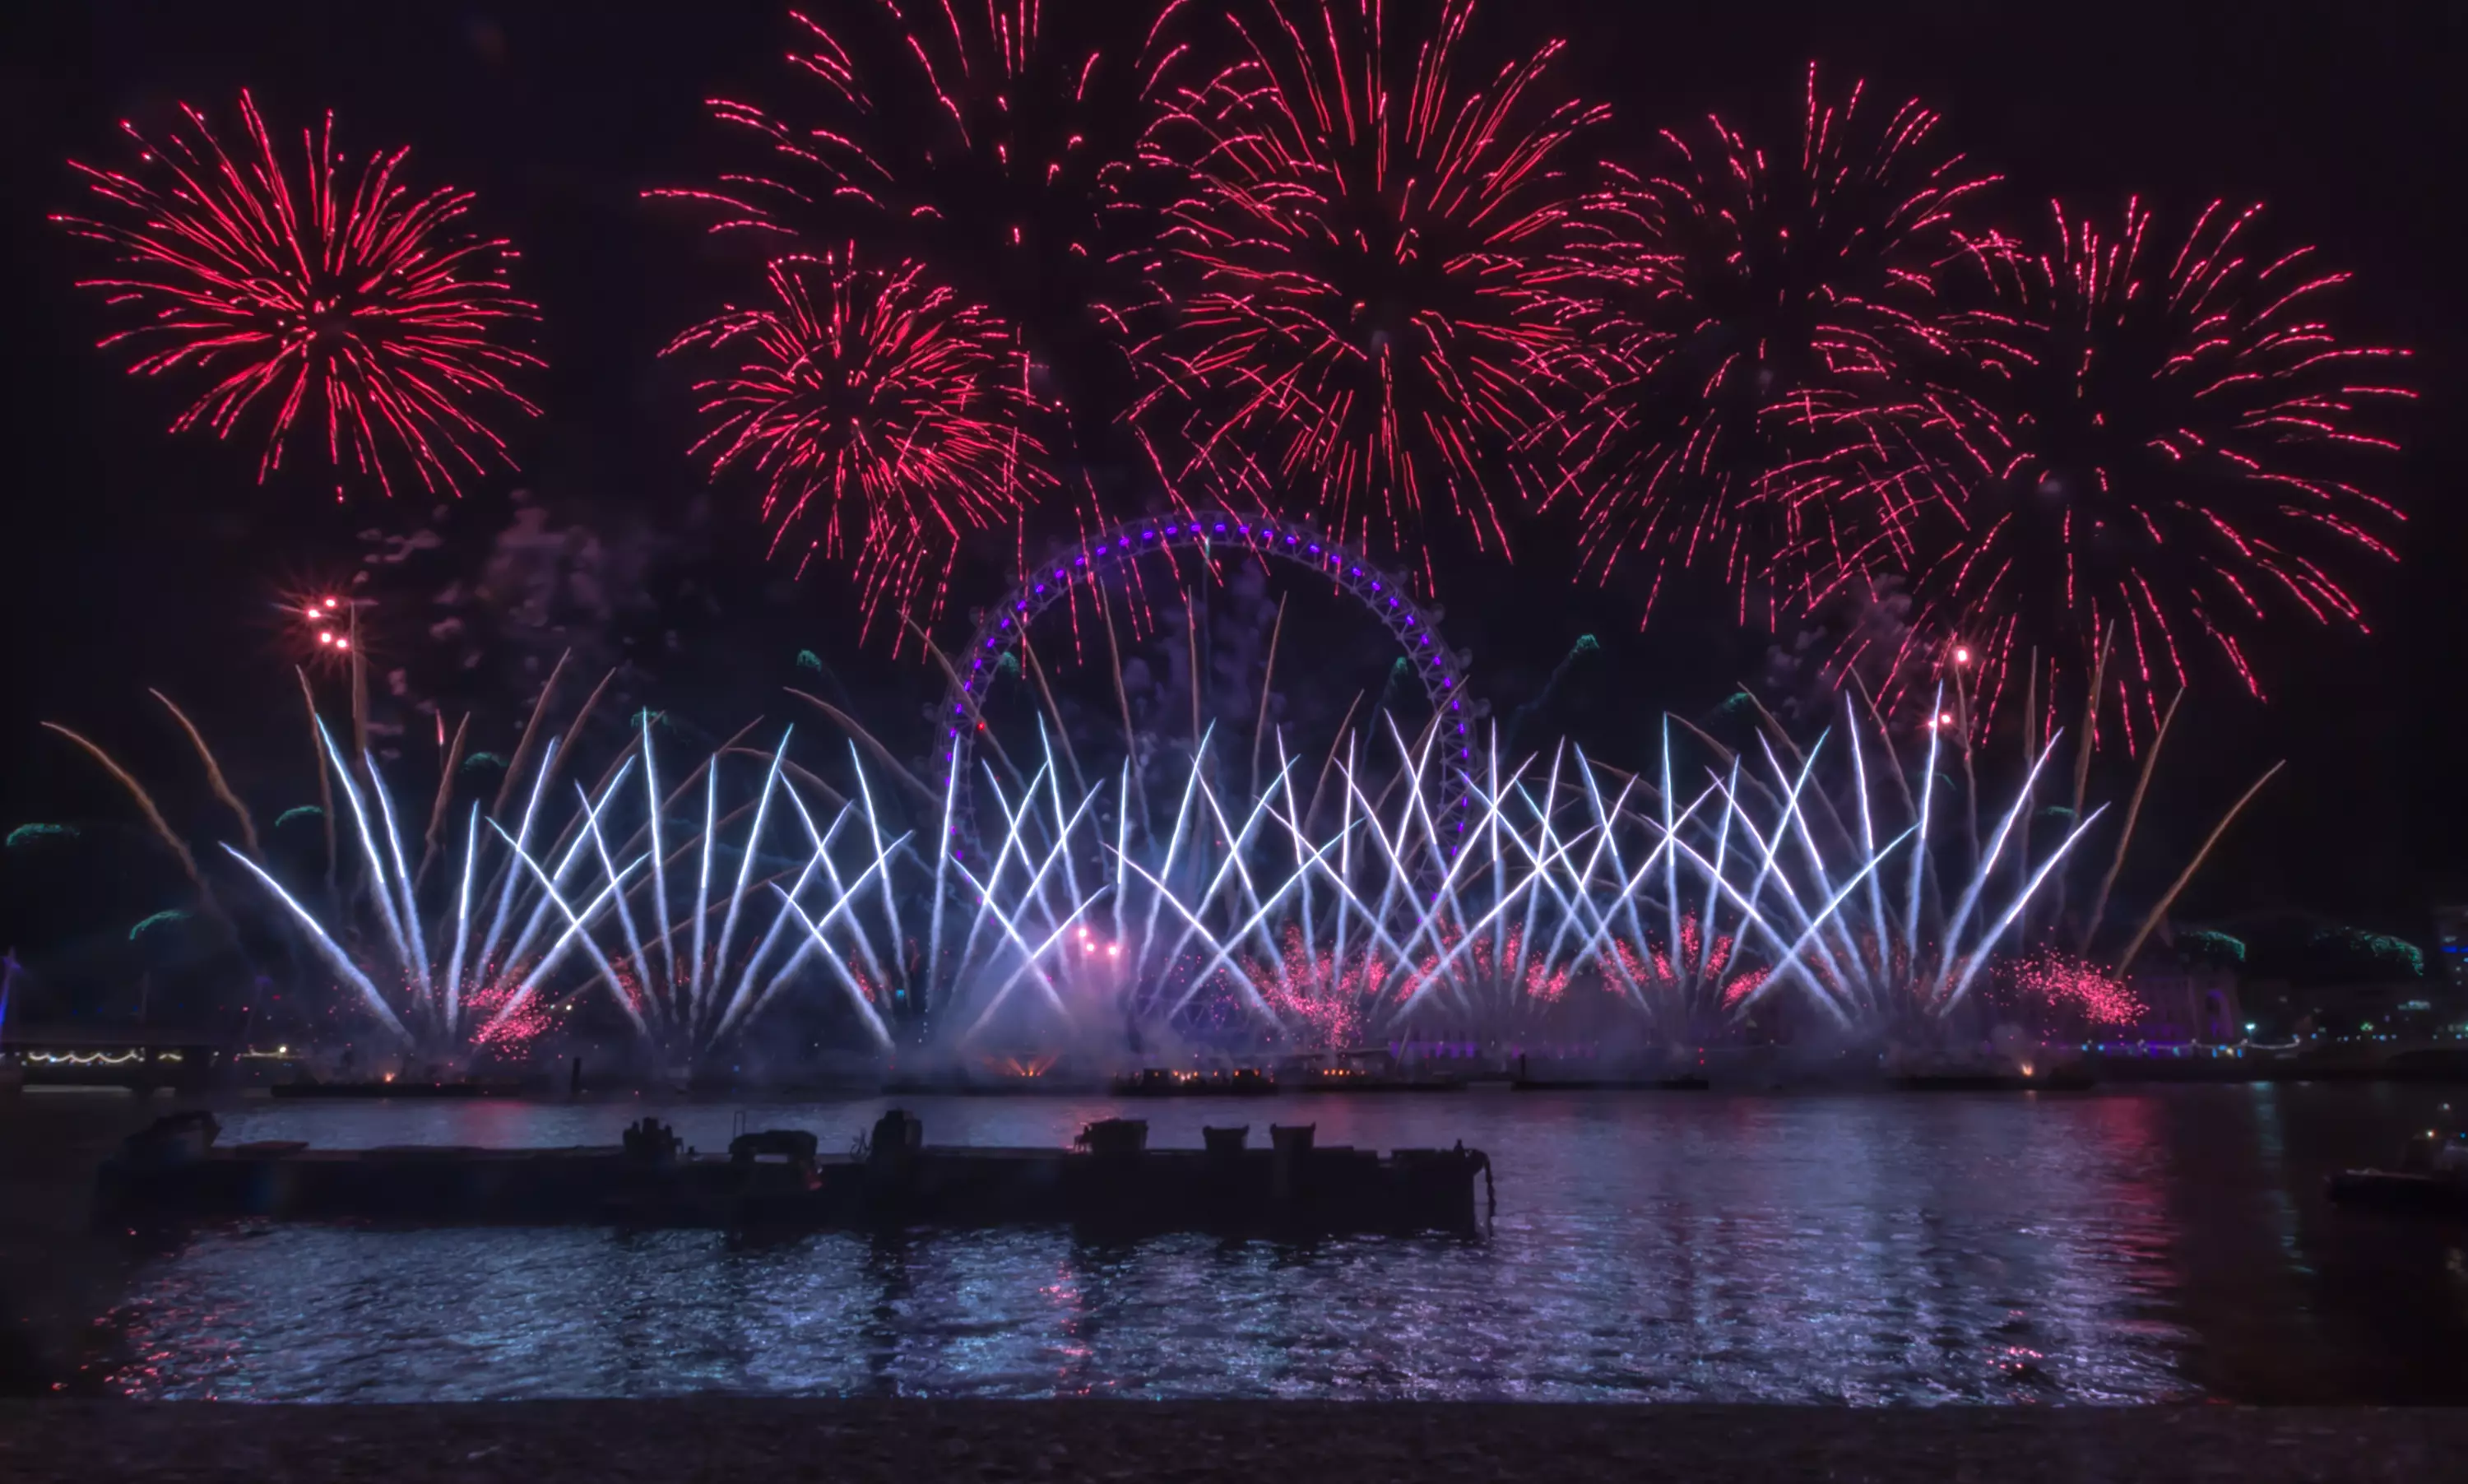 The traditional fireworks display in London has been cancelled.